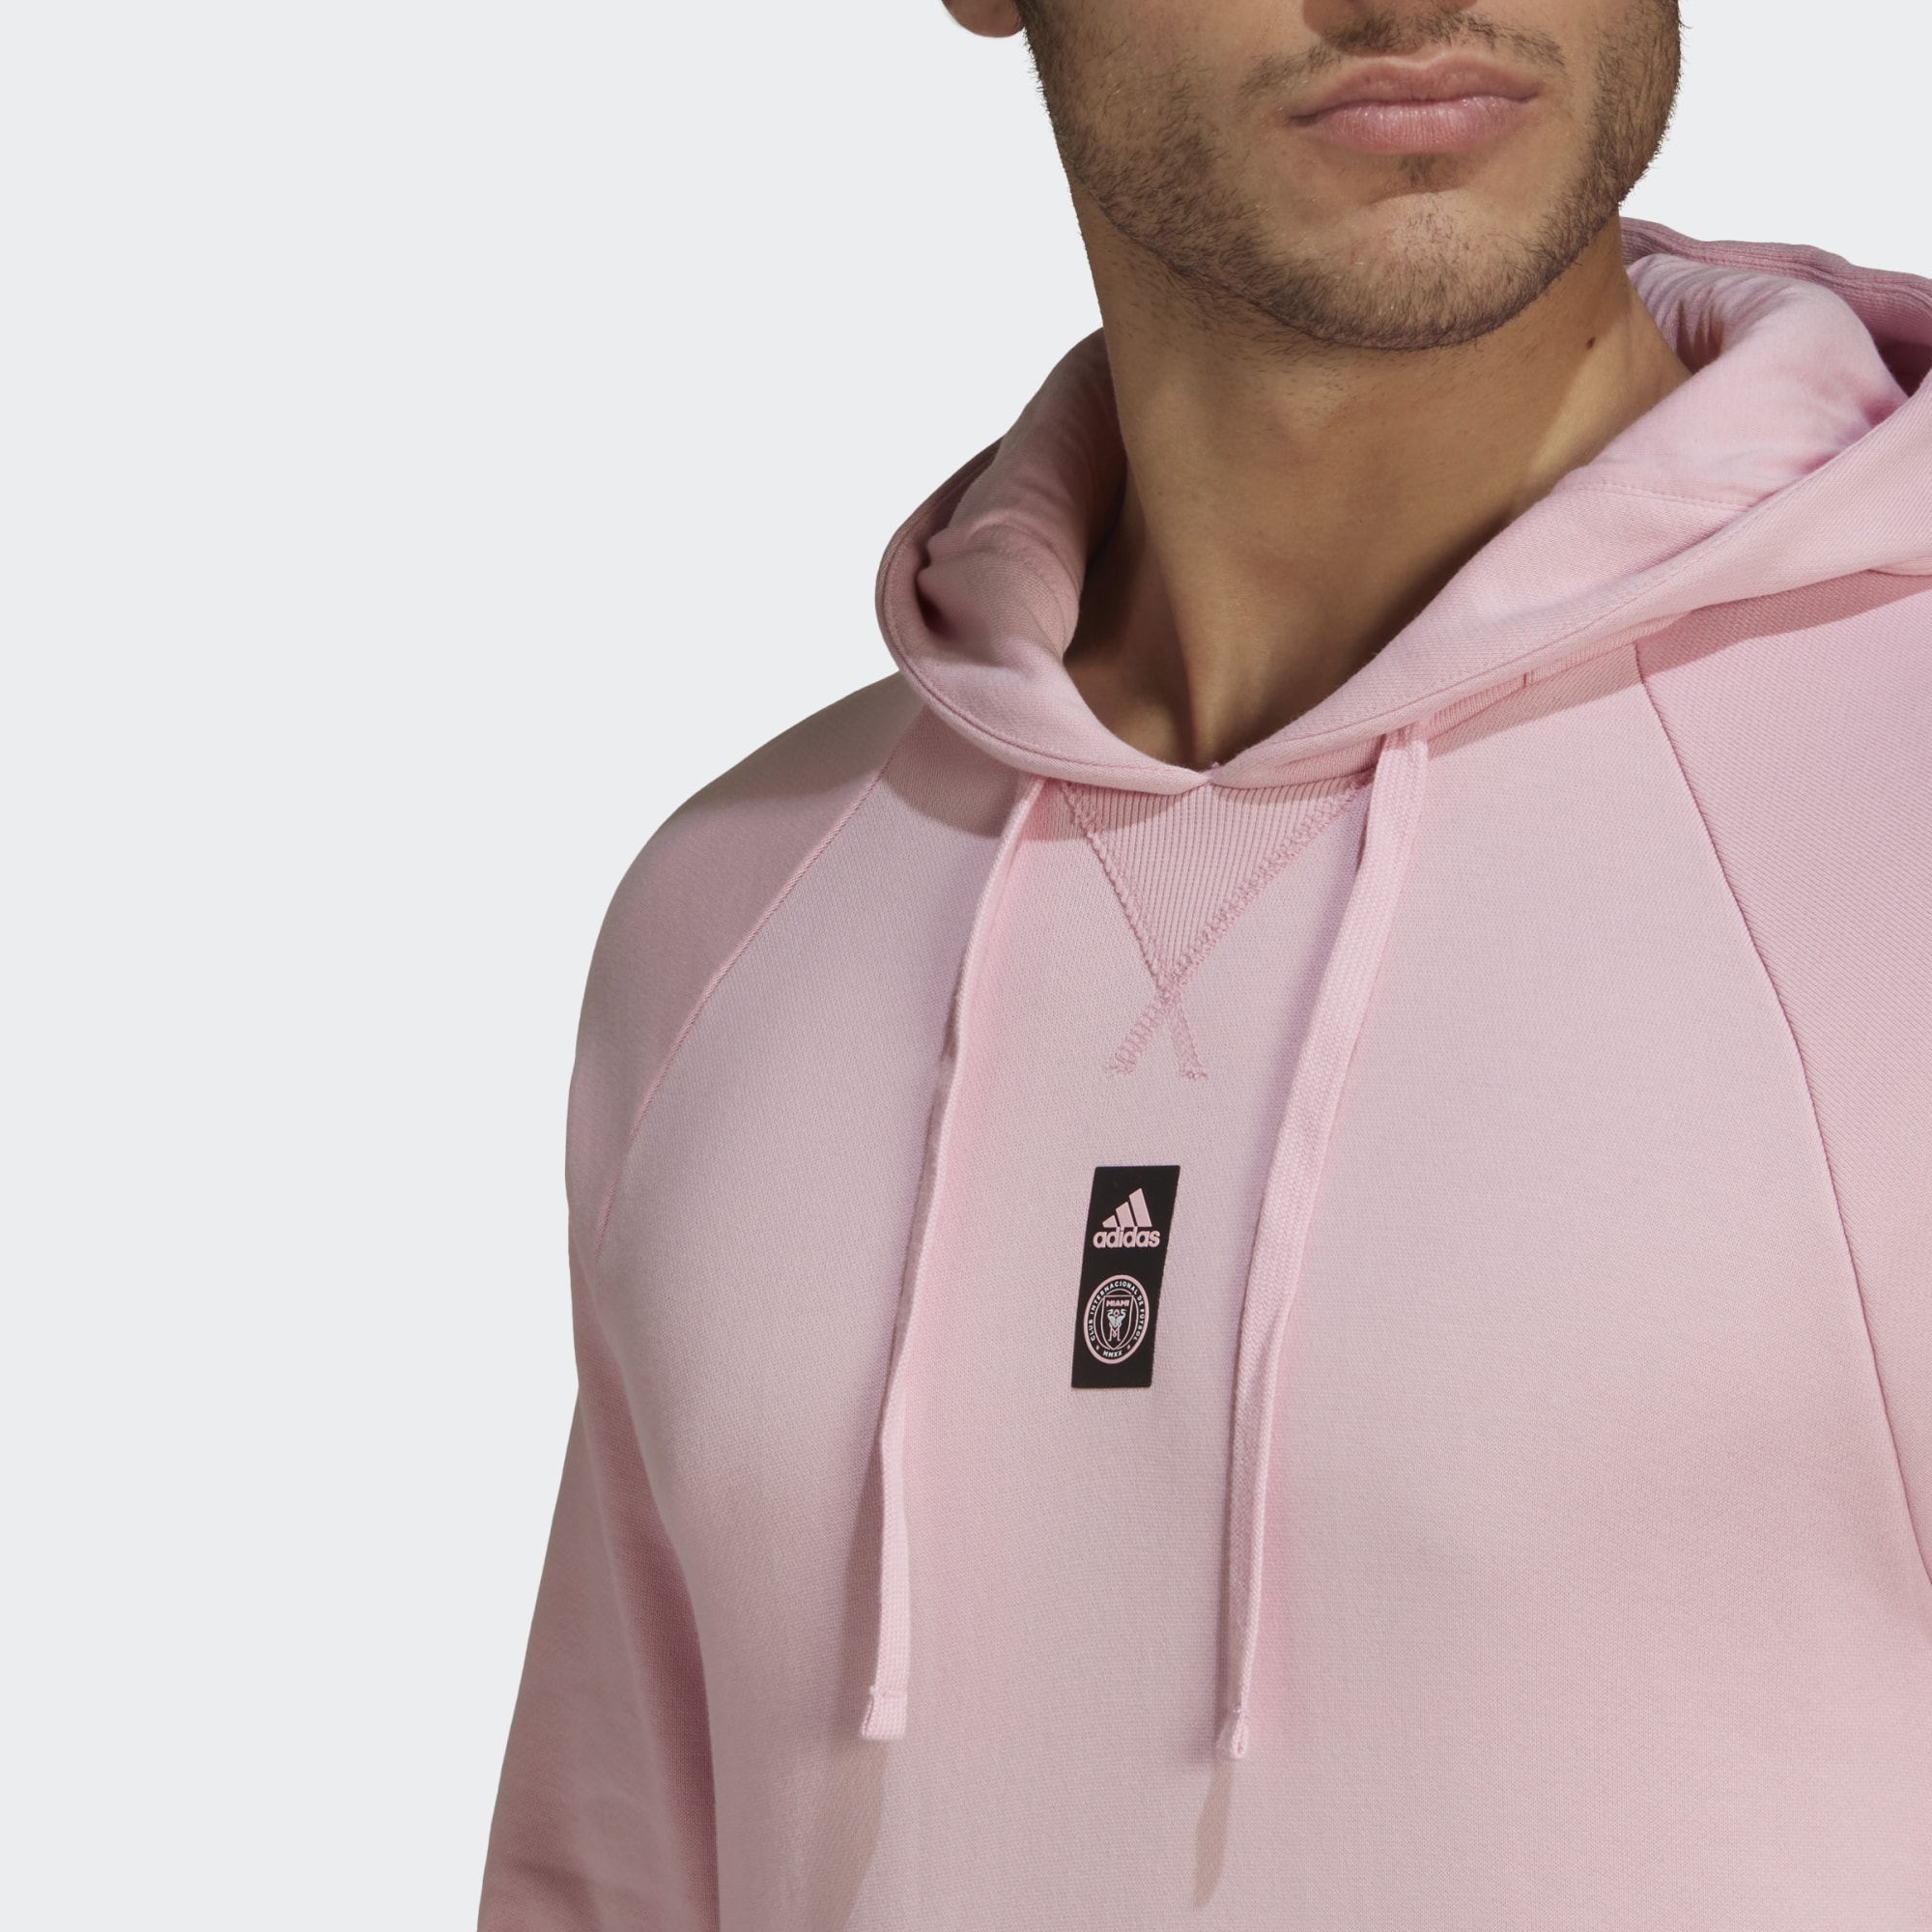 Inter Miami CF 2022 Travel Hoodie - True Pink - Football Shirt Culture -  Latest Football Kit News and More